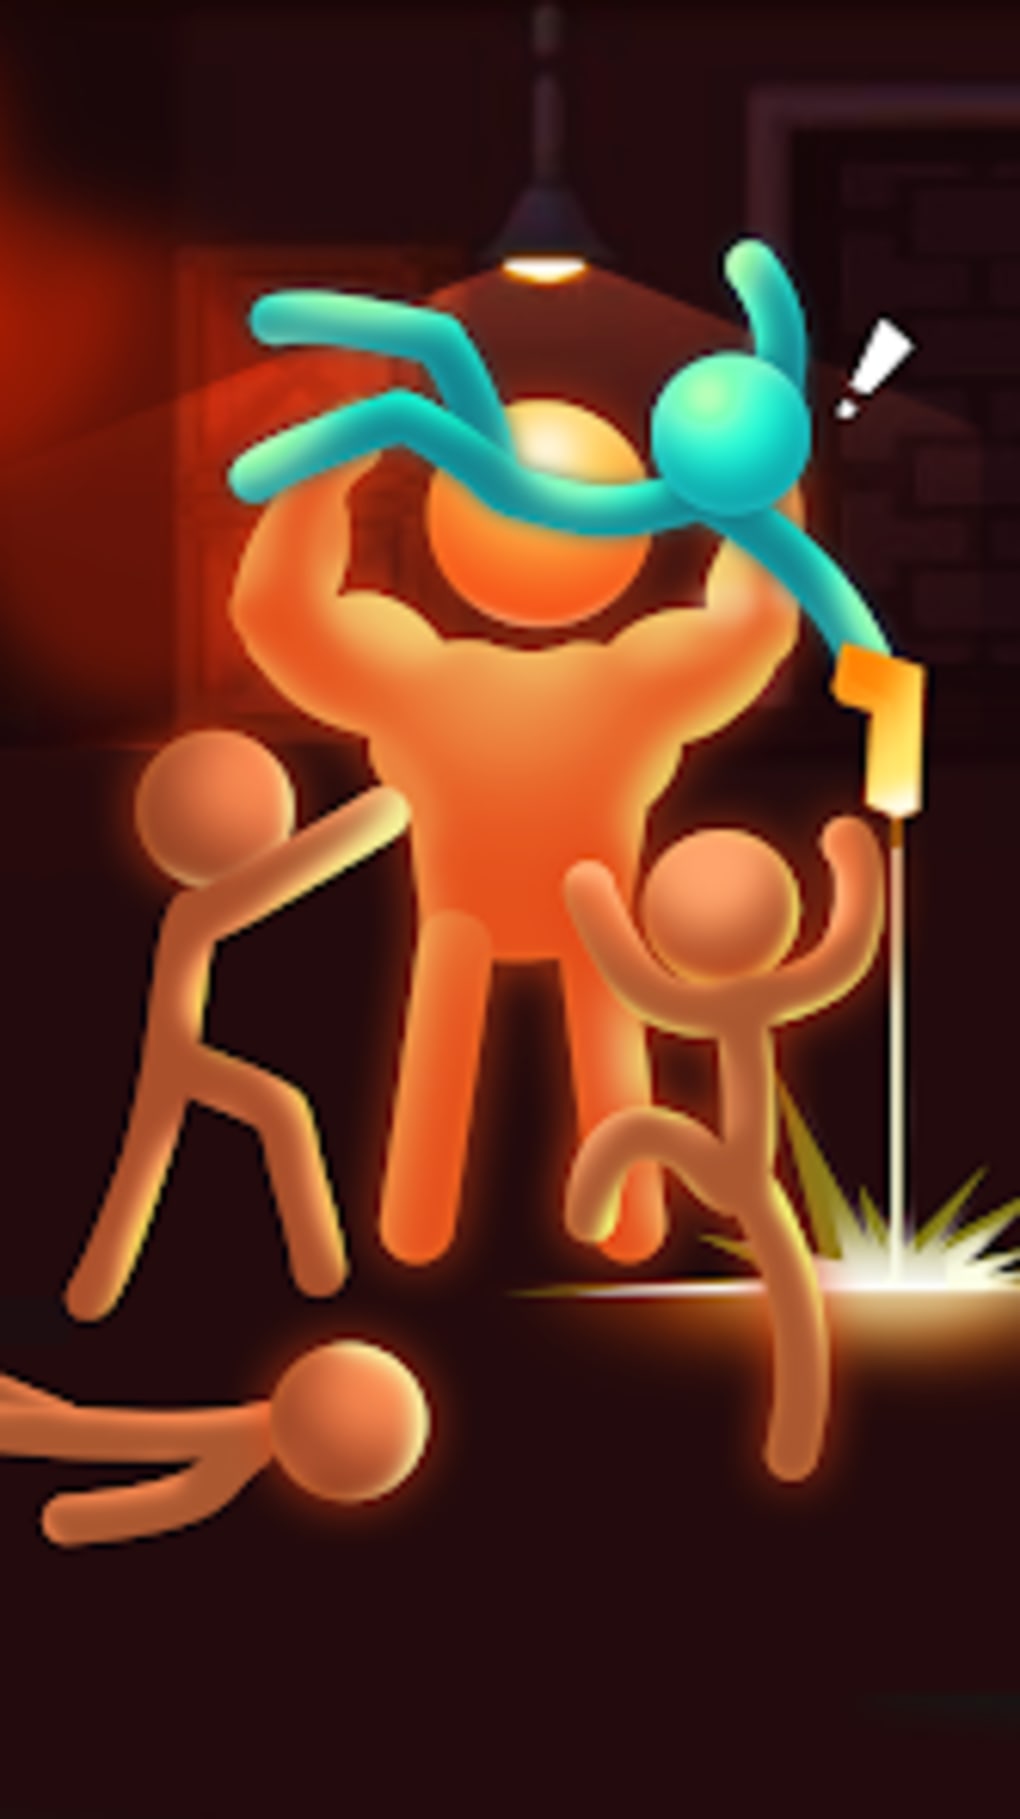 Stickfight Infinity APK Download for Android Free